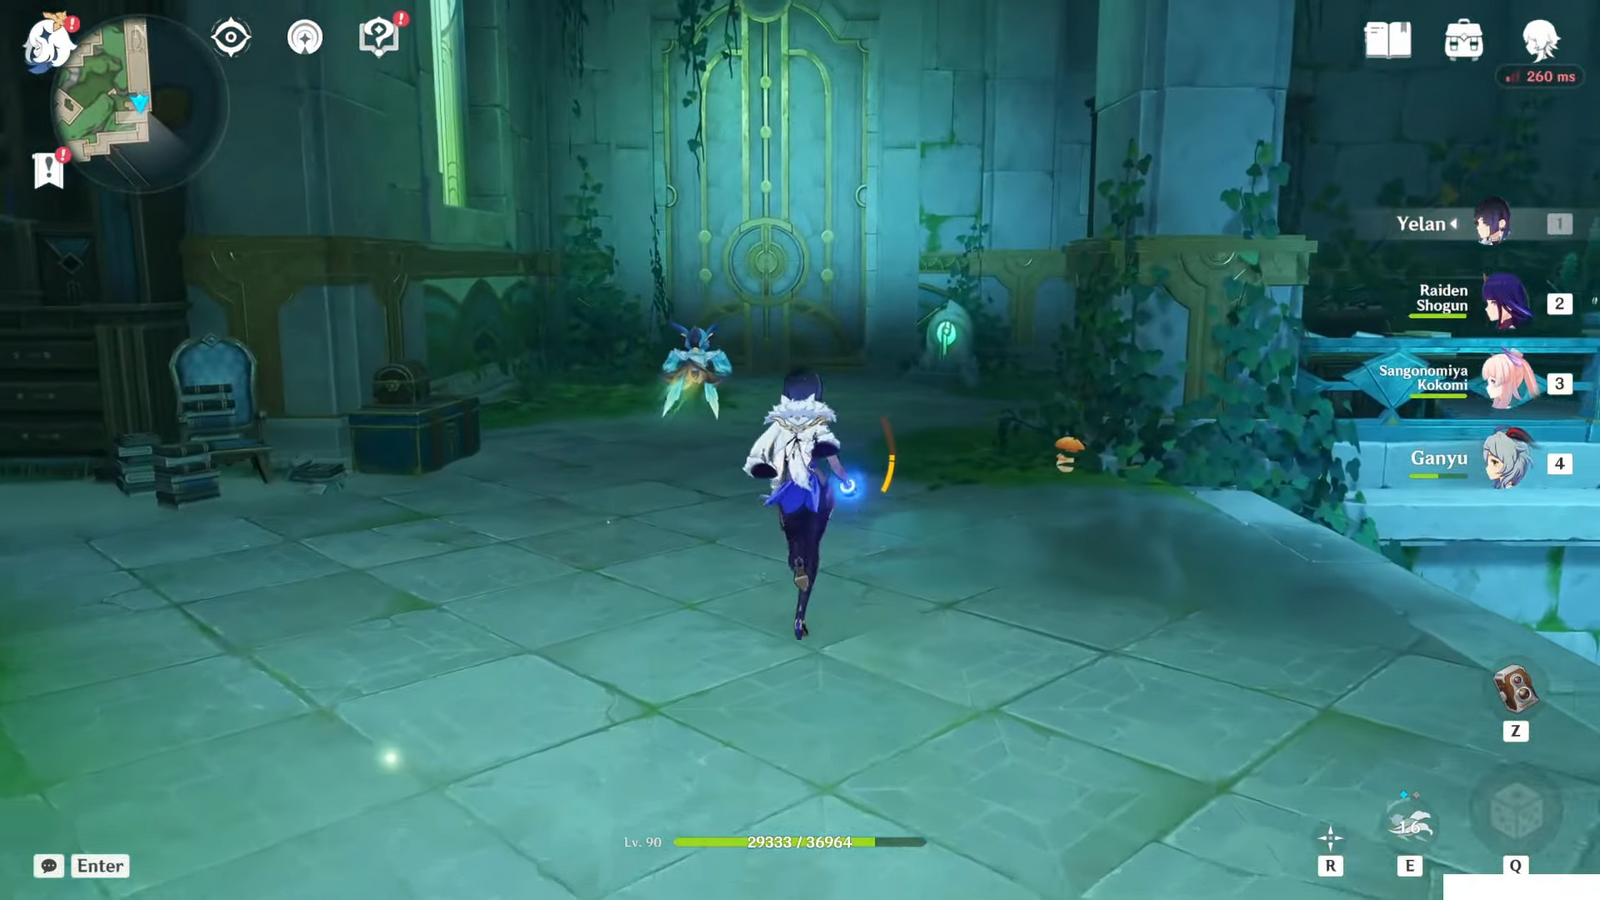 The player character using the Key to Some Place in The Institute in Genshin Impact.